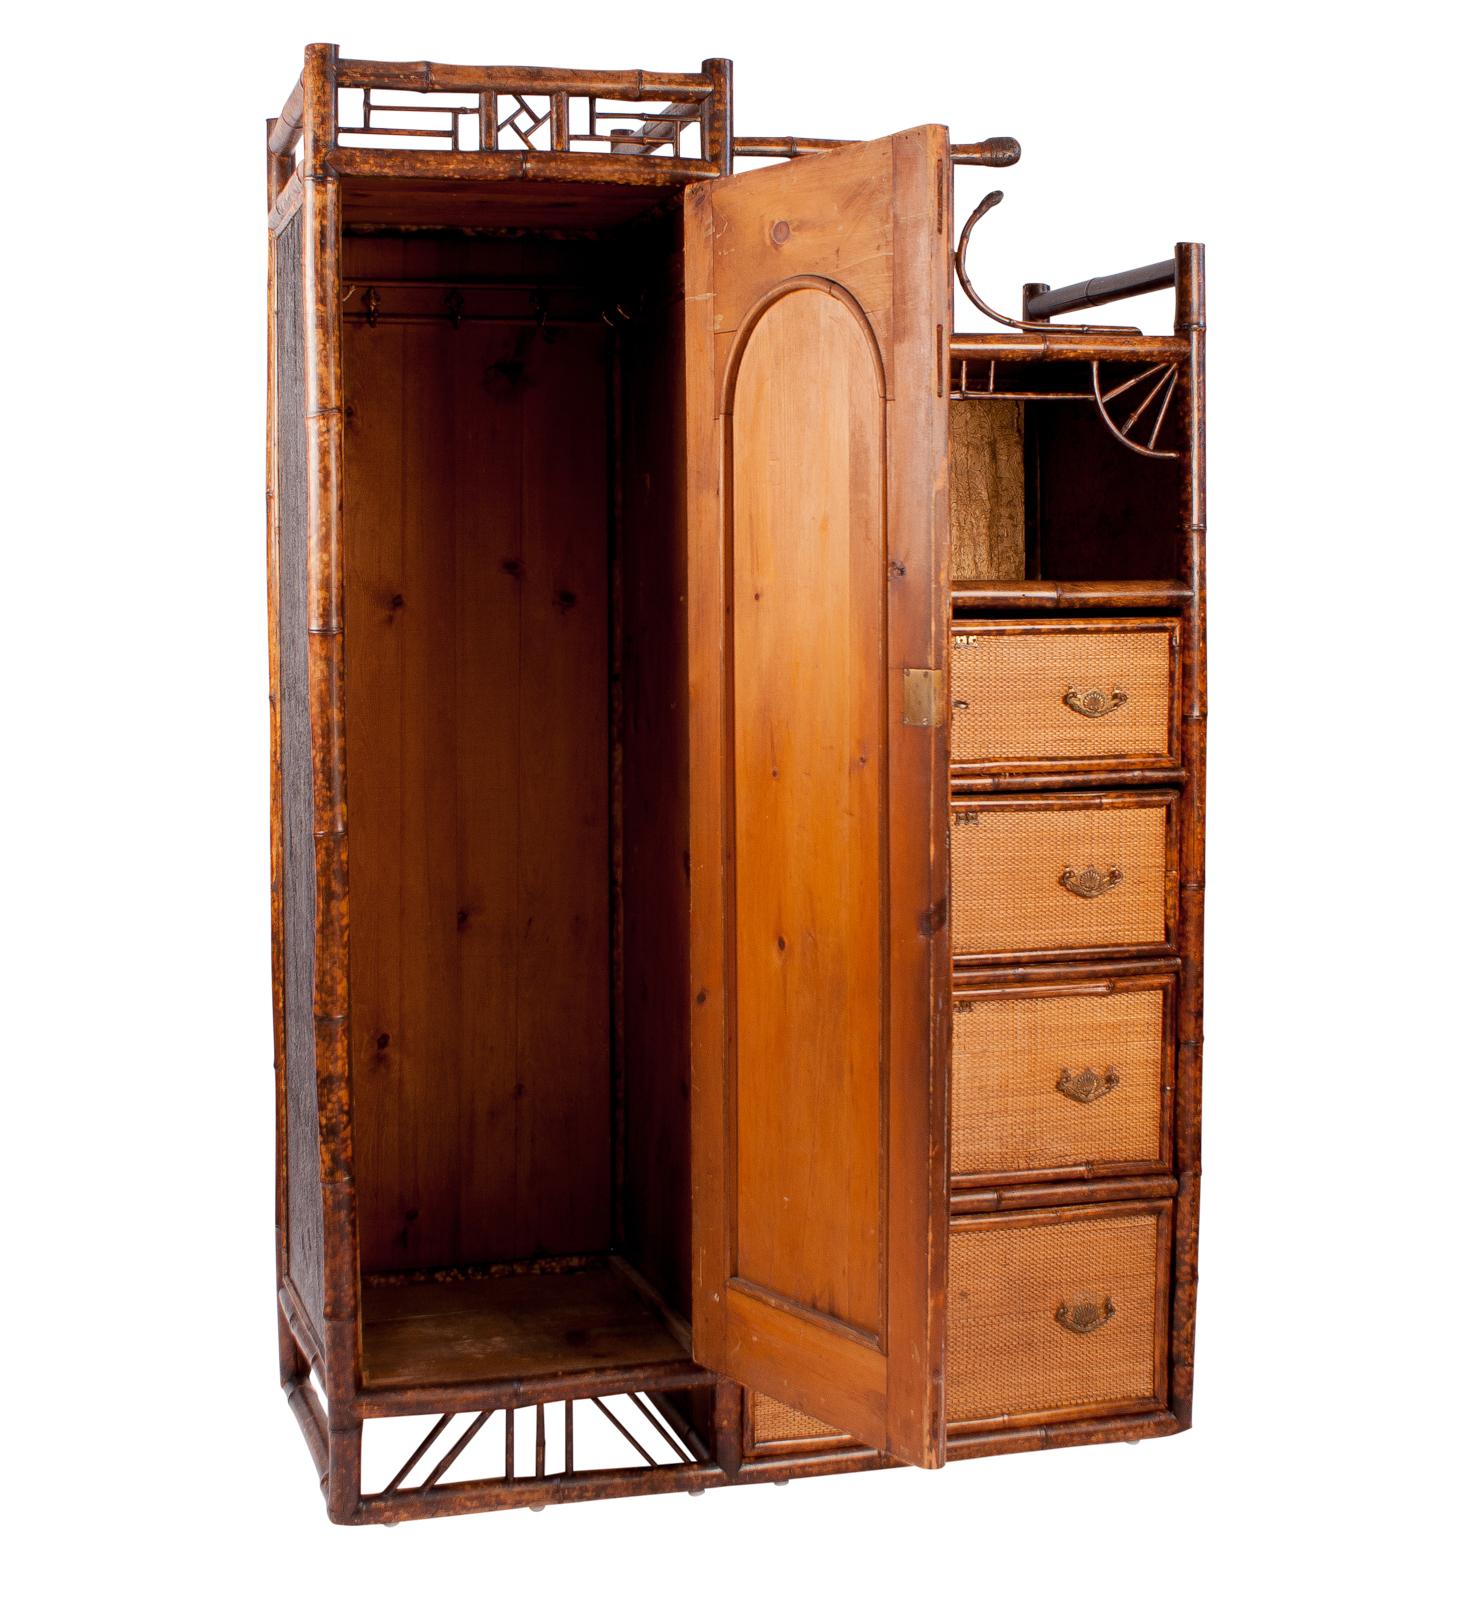 A late 19th century Victorian English bamboo and wicker dressing cabinet with 4 drawers, a shelf and a dressing mirror, circa 1880.